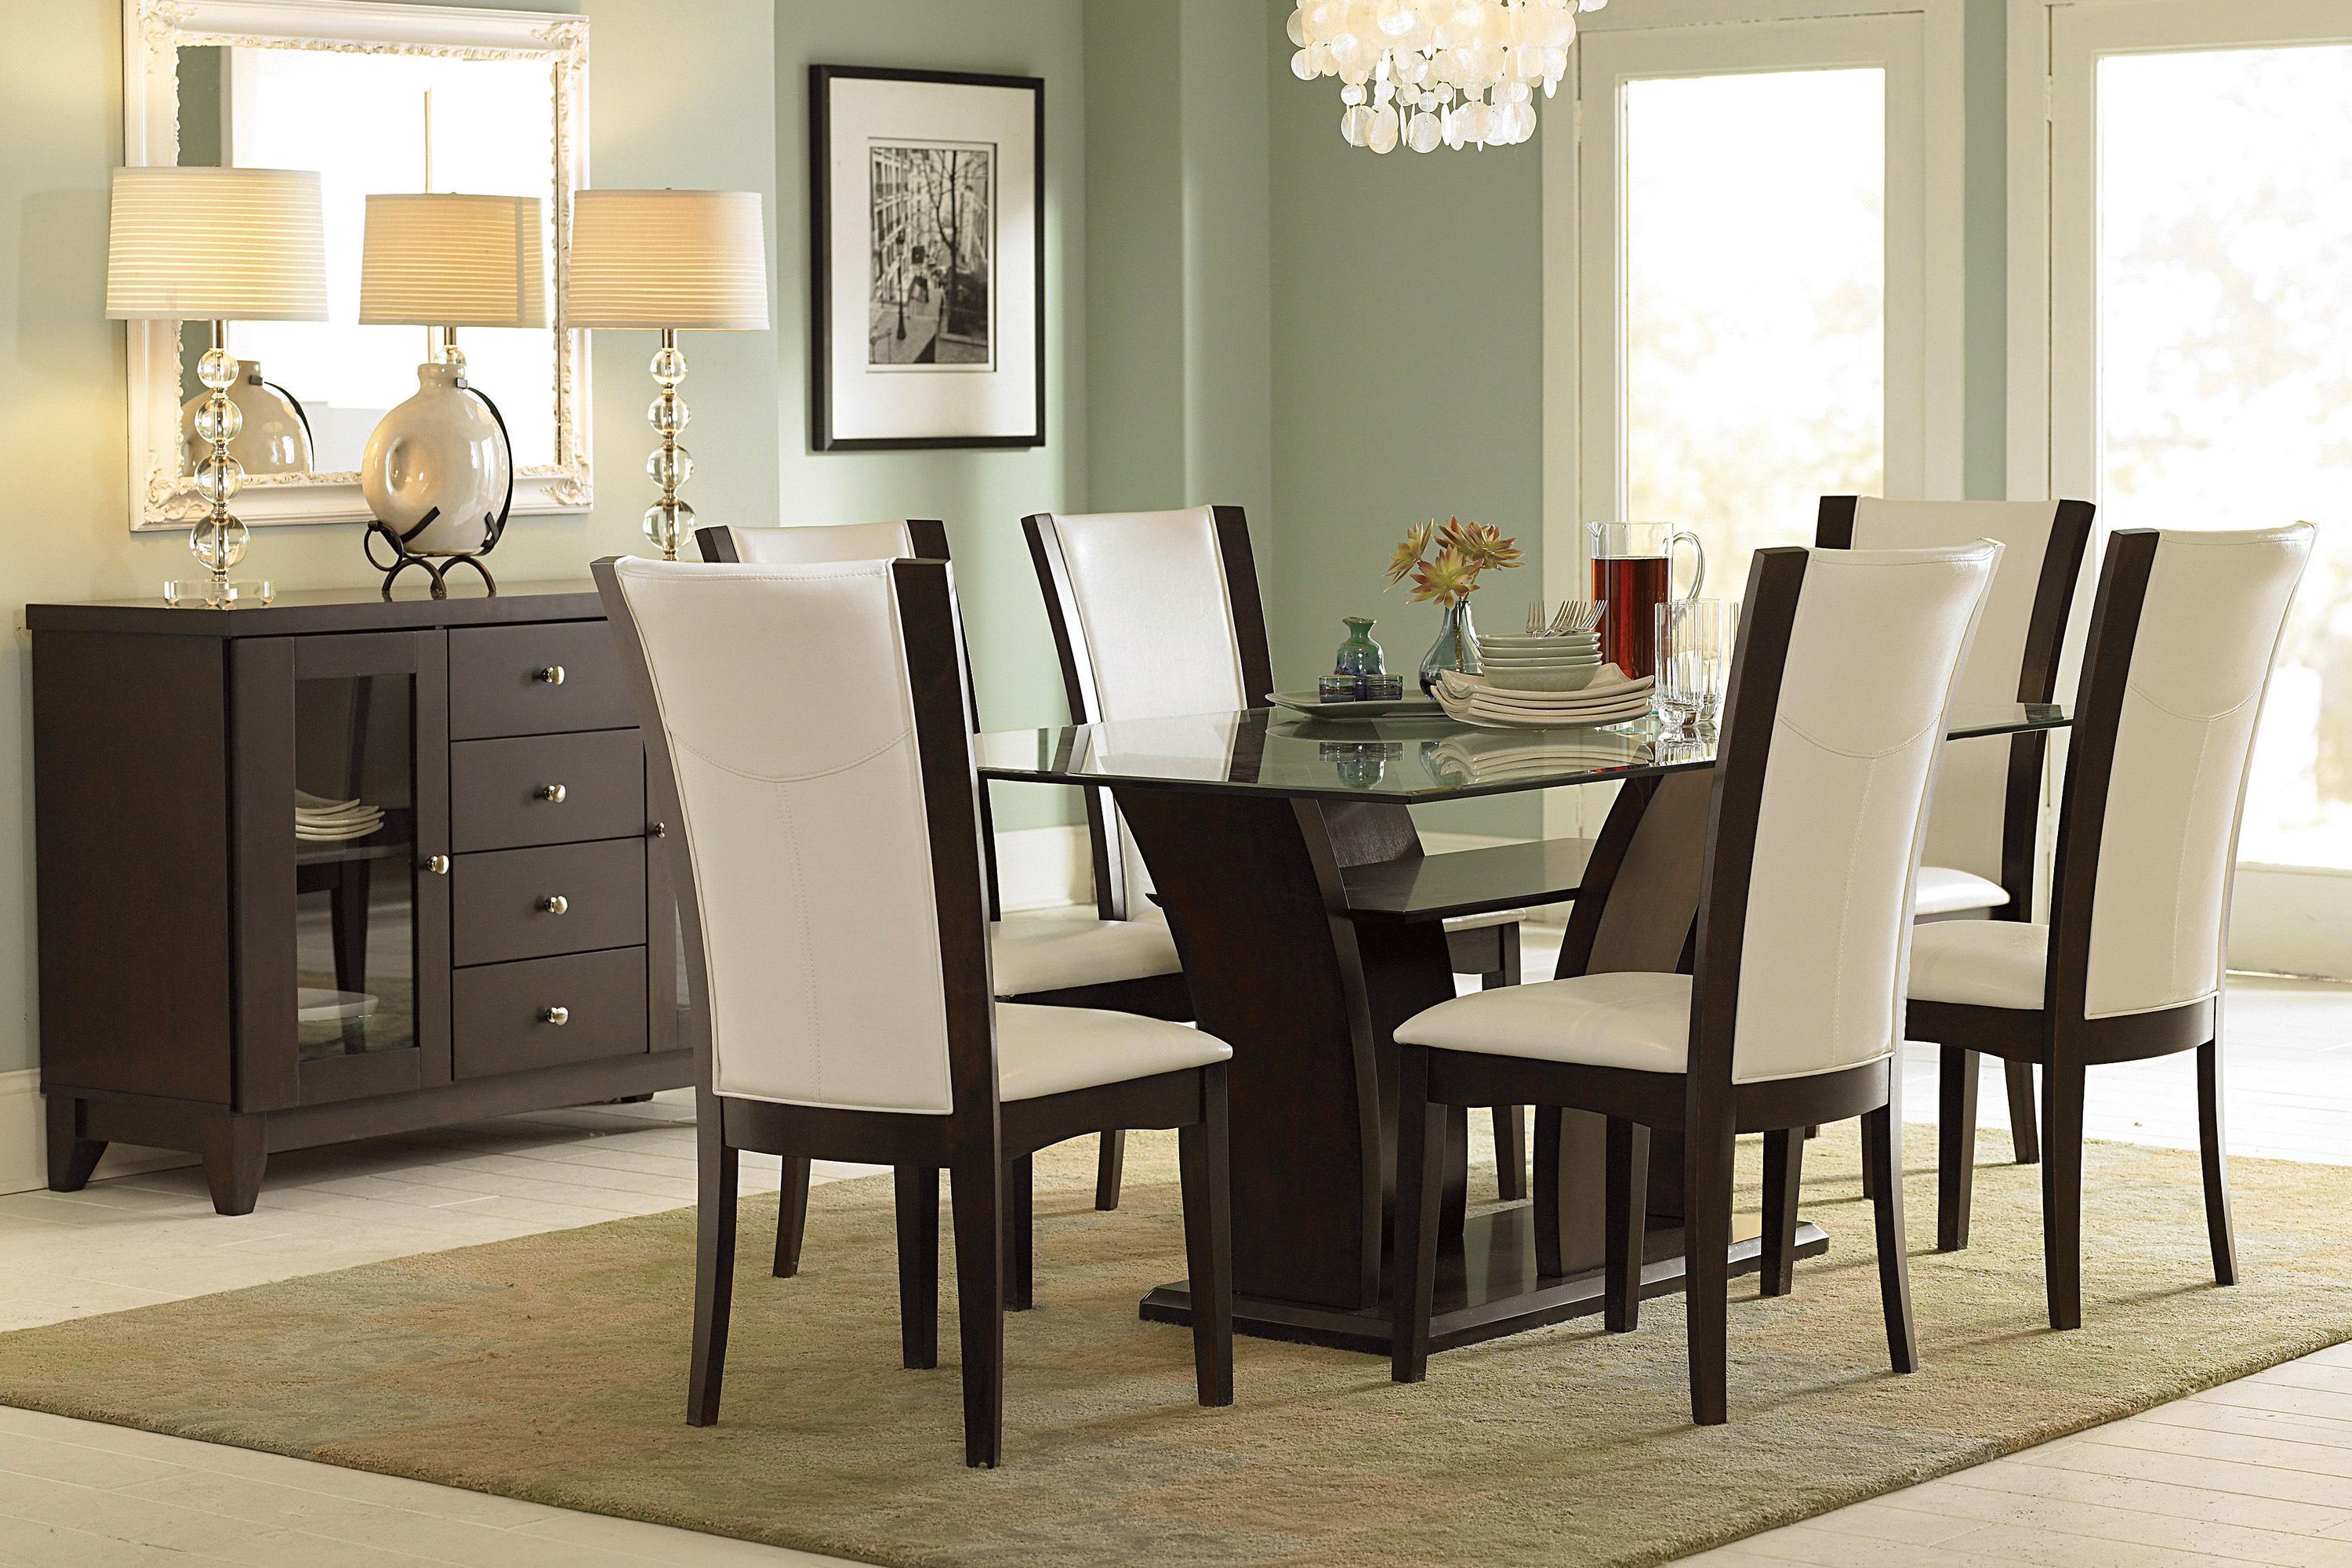 Contemporary Dining Room Set 710-72-W-7PC Daisy 710-72-W-7PC in Espresso, White Faux Leather